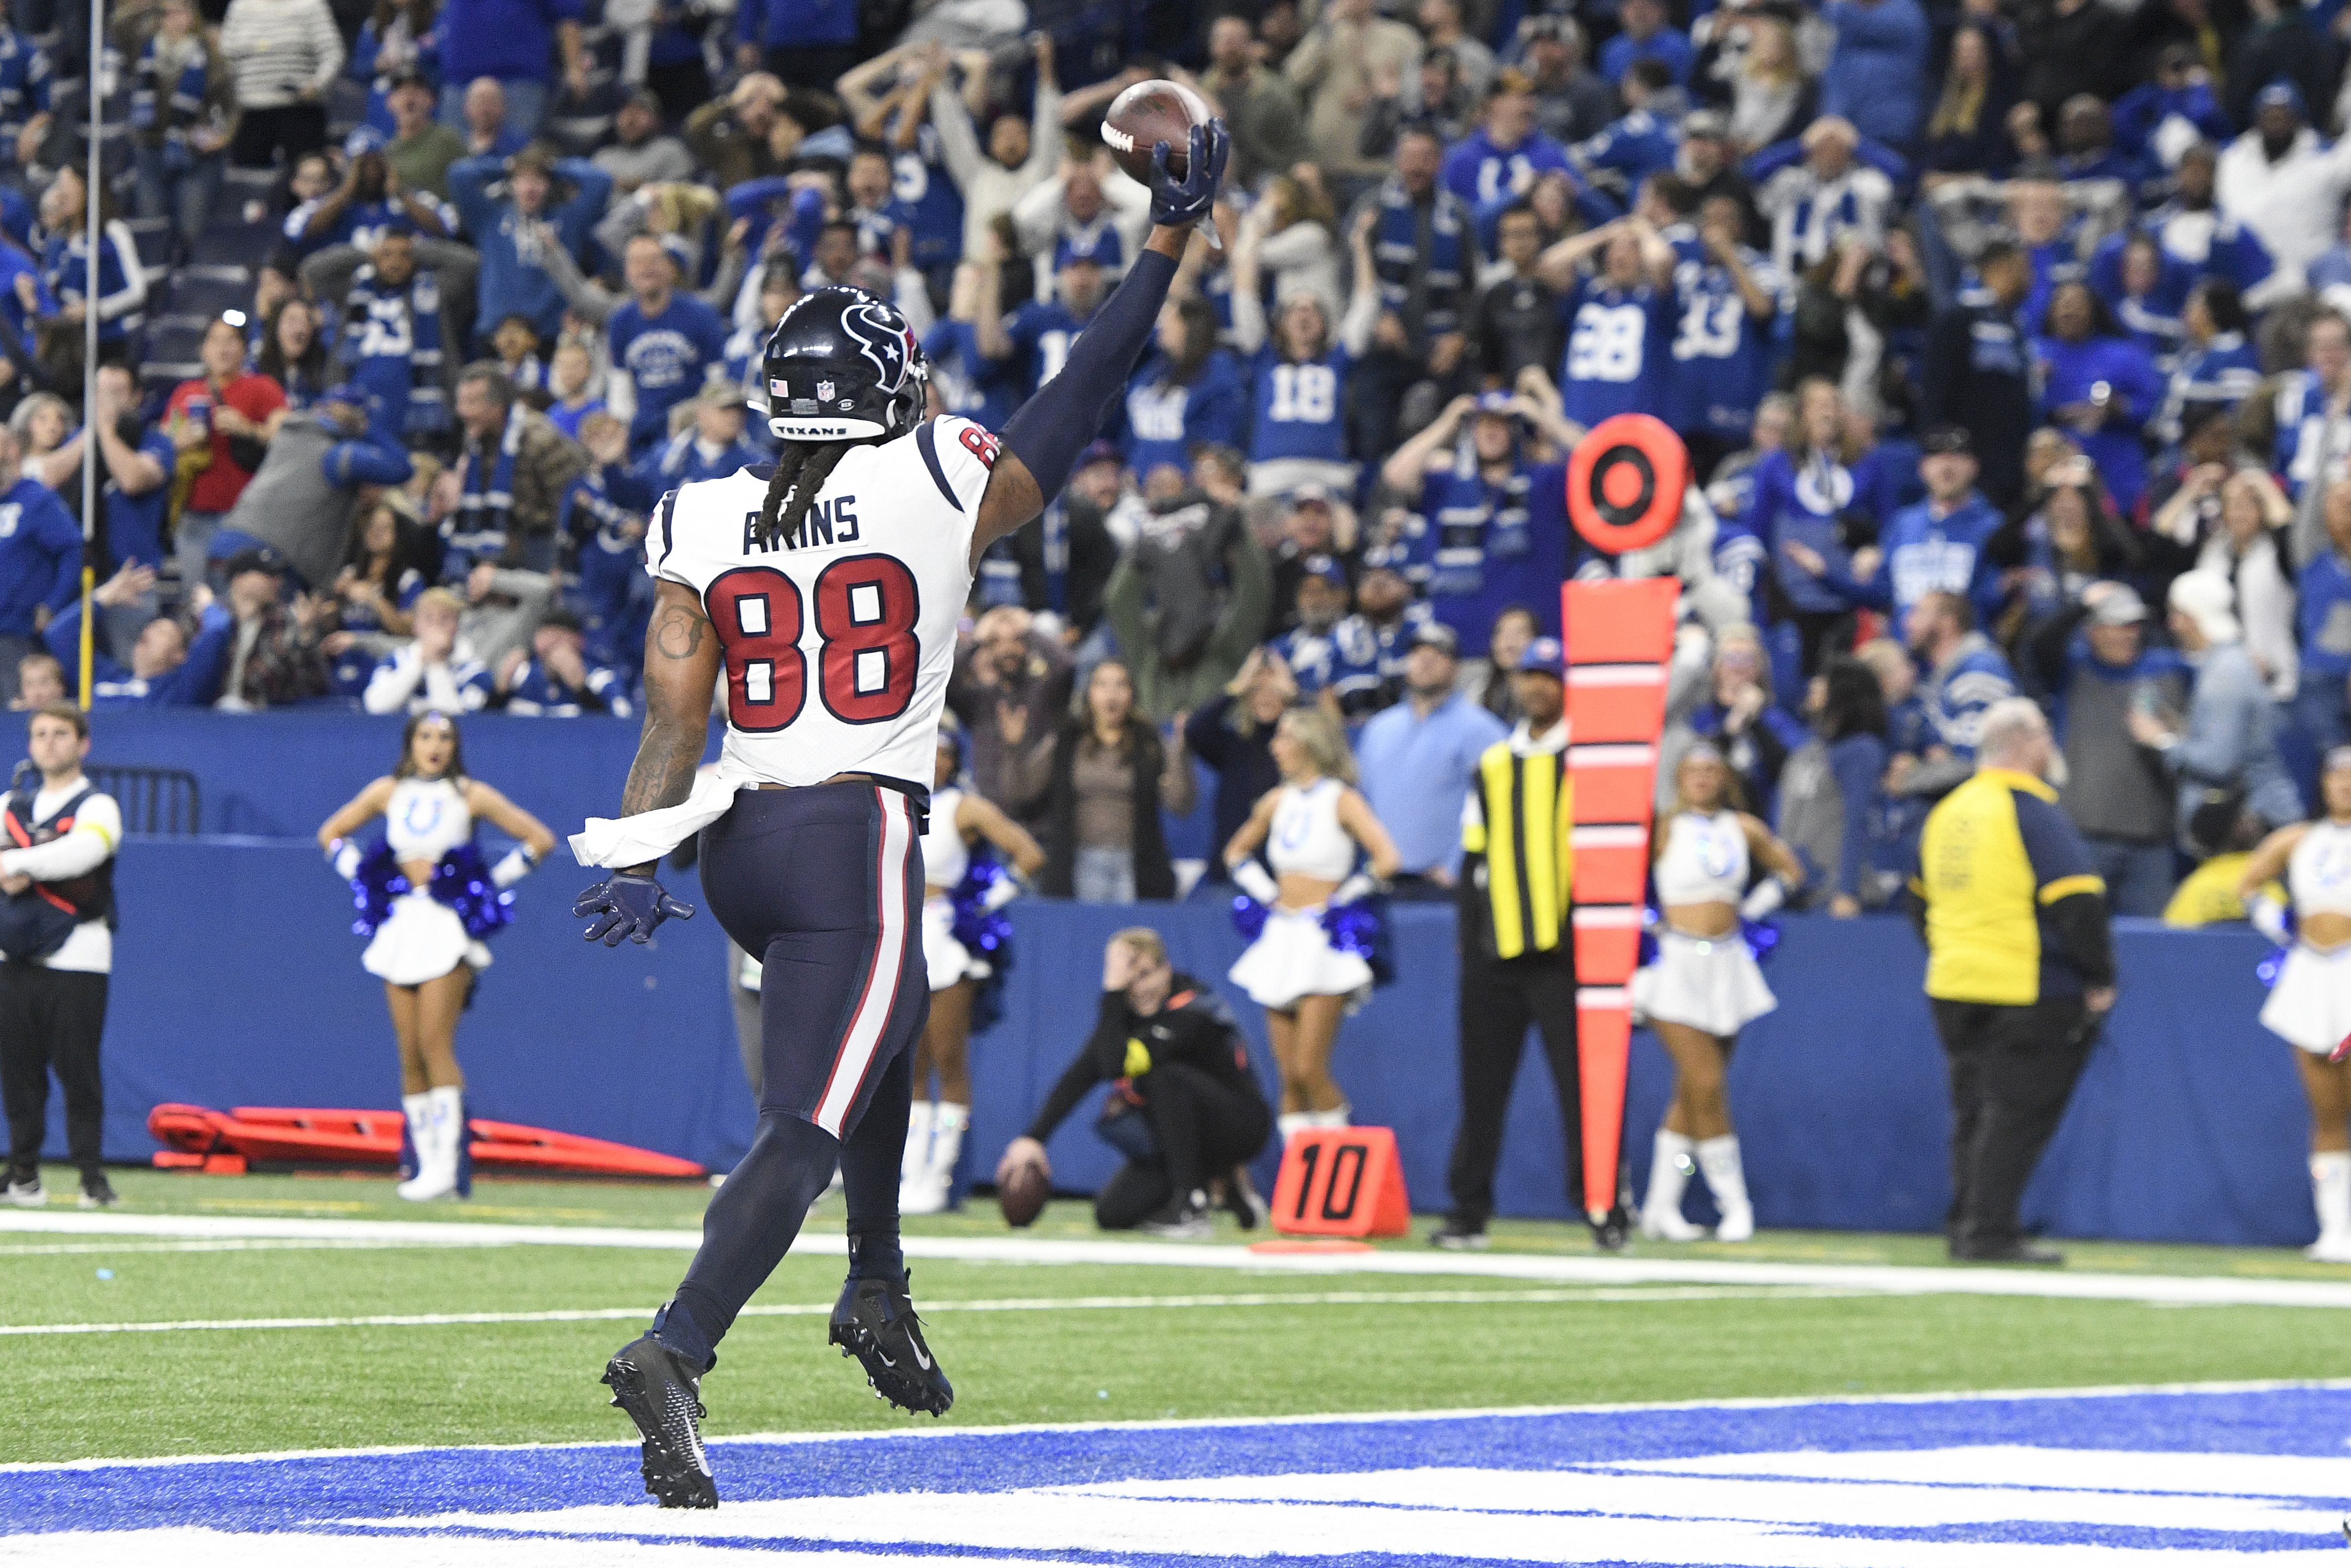 Tight end Jordan Akins of the Houston Texans celebrates after scoring a touchdown in the game against the Indianapolis Colts at Lucas Oil Stadium in Indianapolis, Indiana, January 8, 2023. /CFP